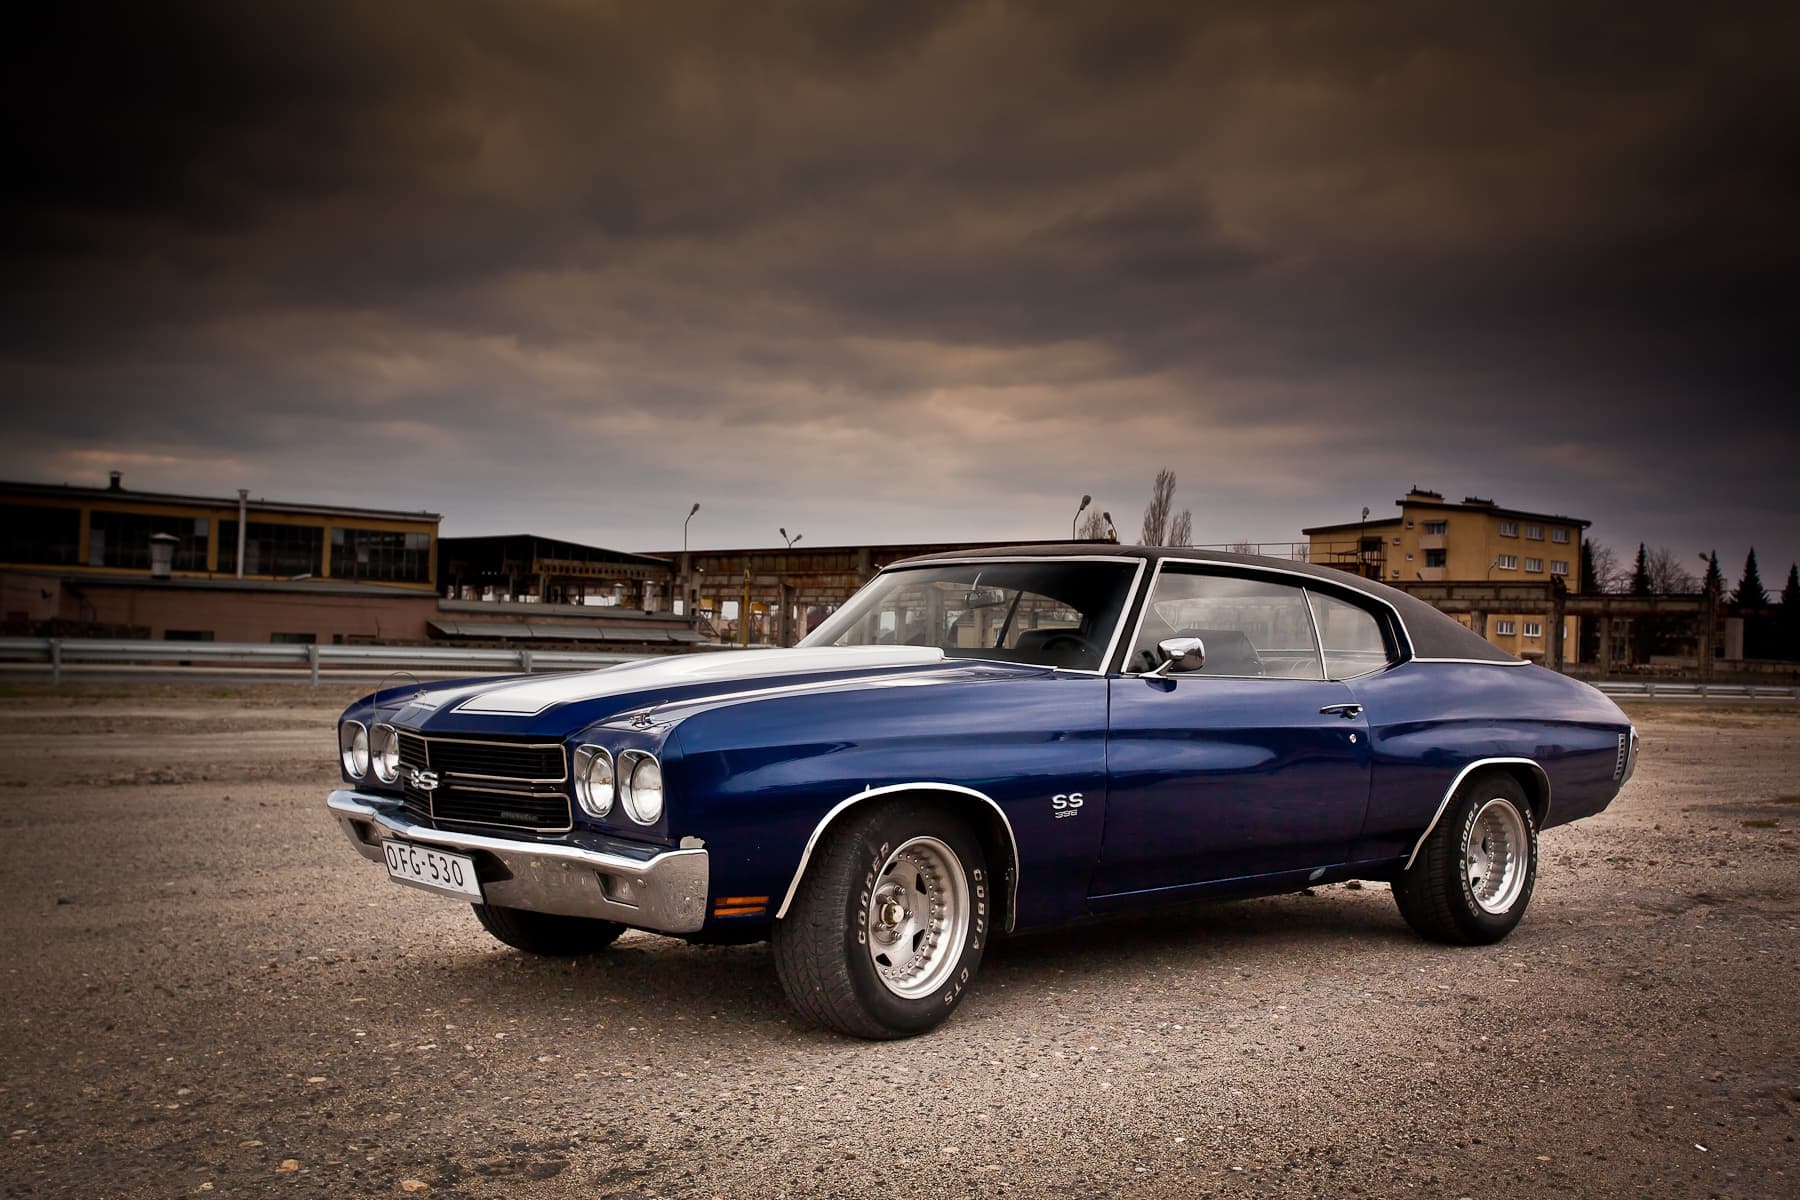 Chevelle Wallpapers Top Free Chevelle Backgrounds Wallpaperaccess